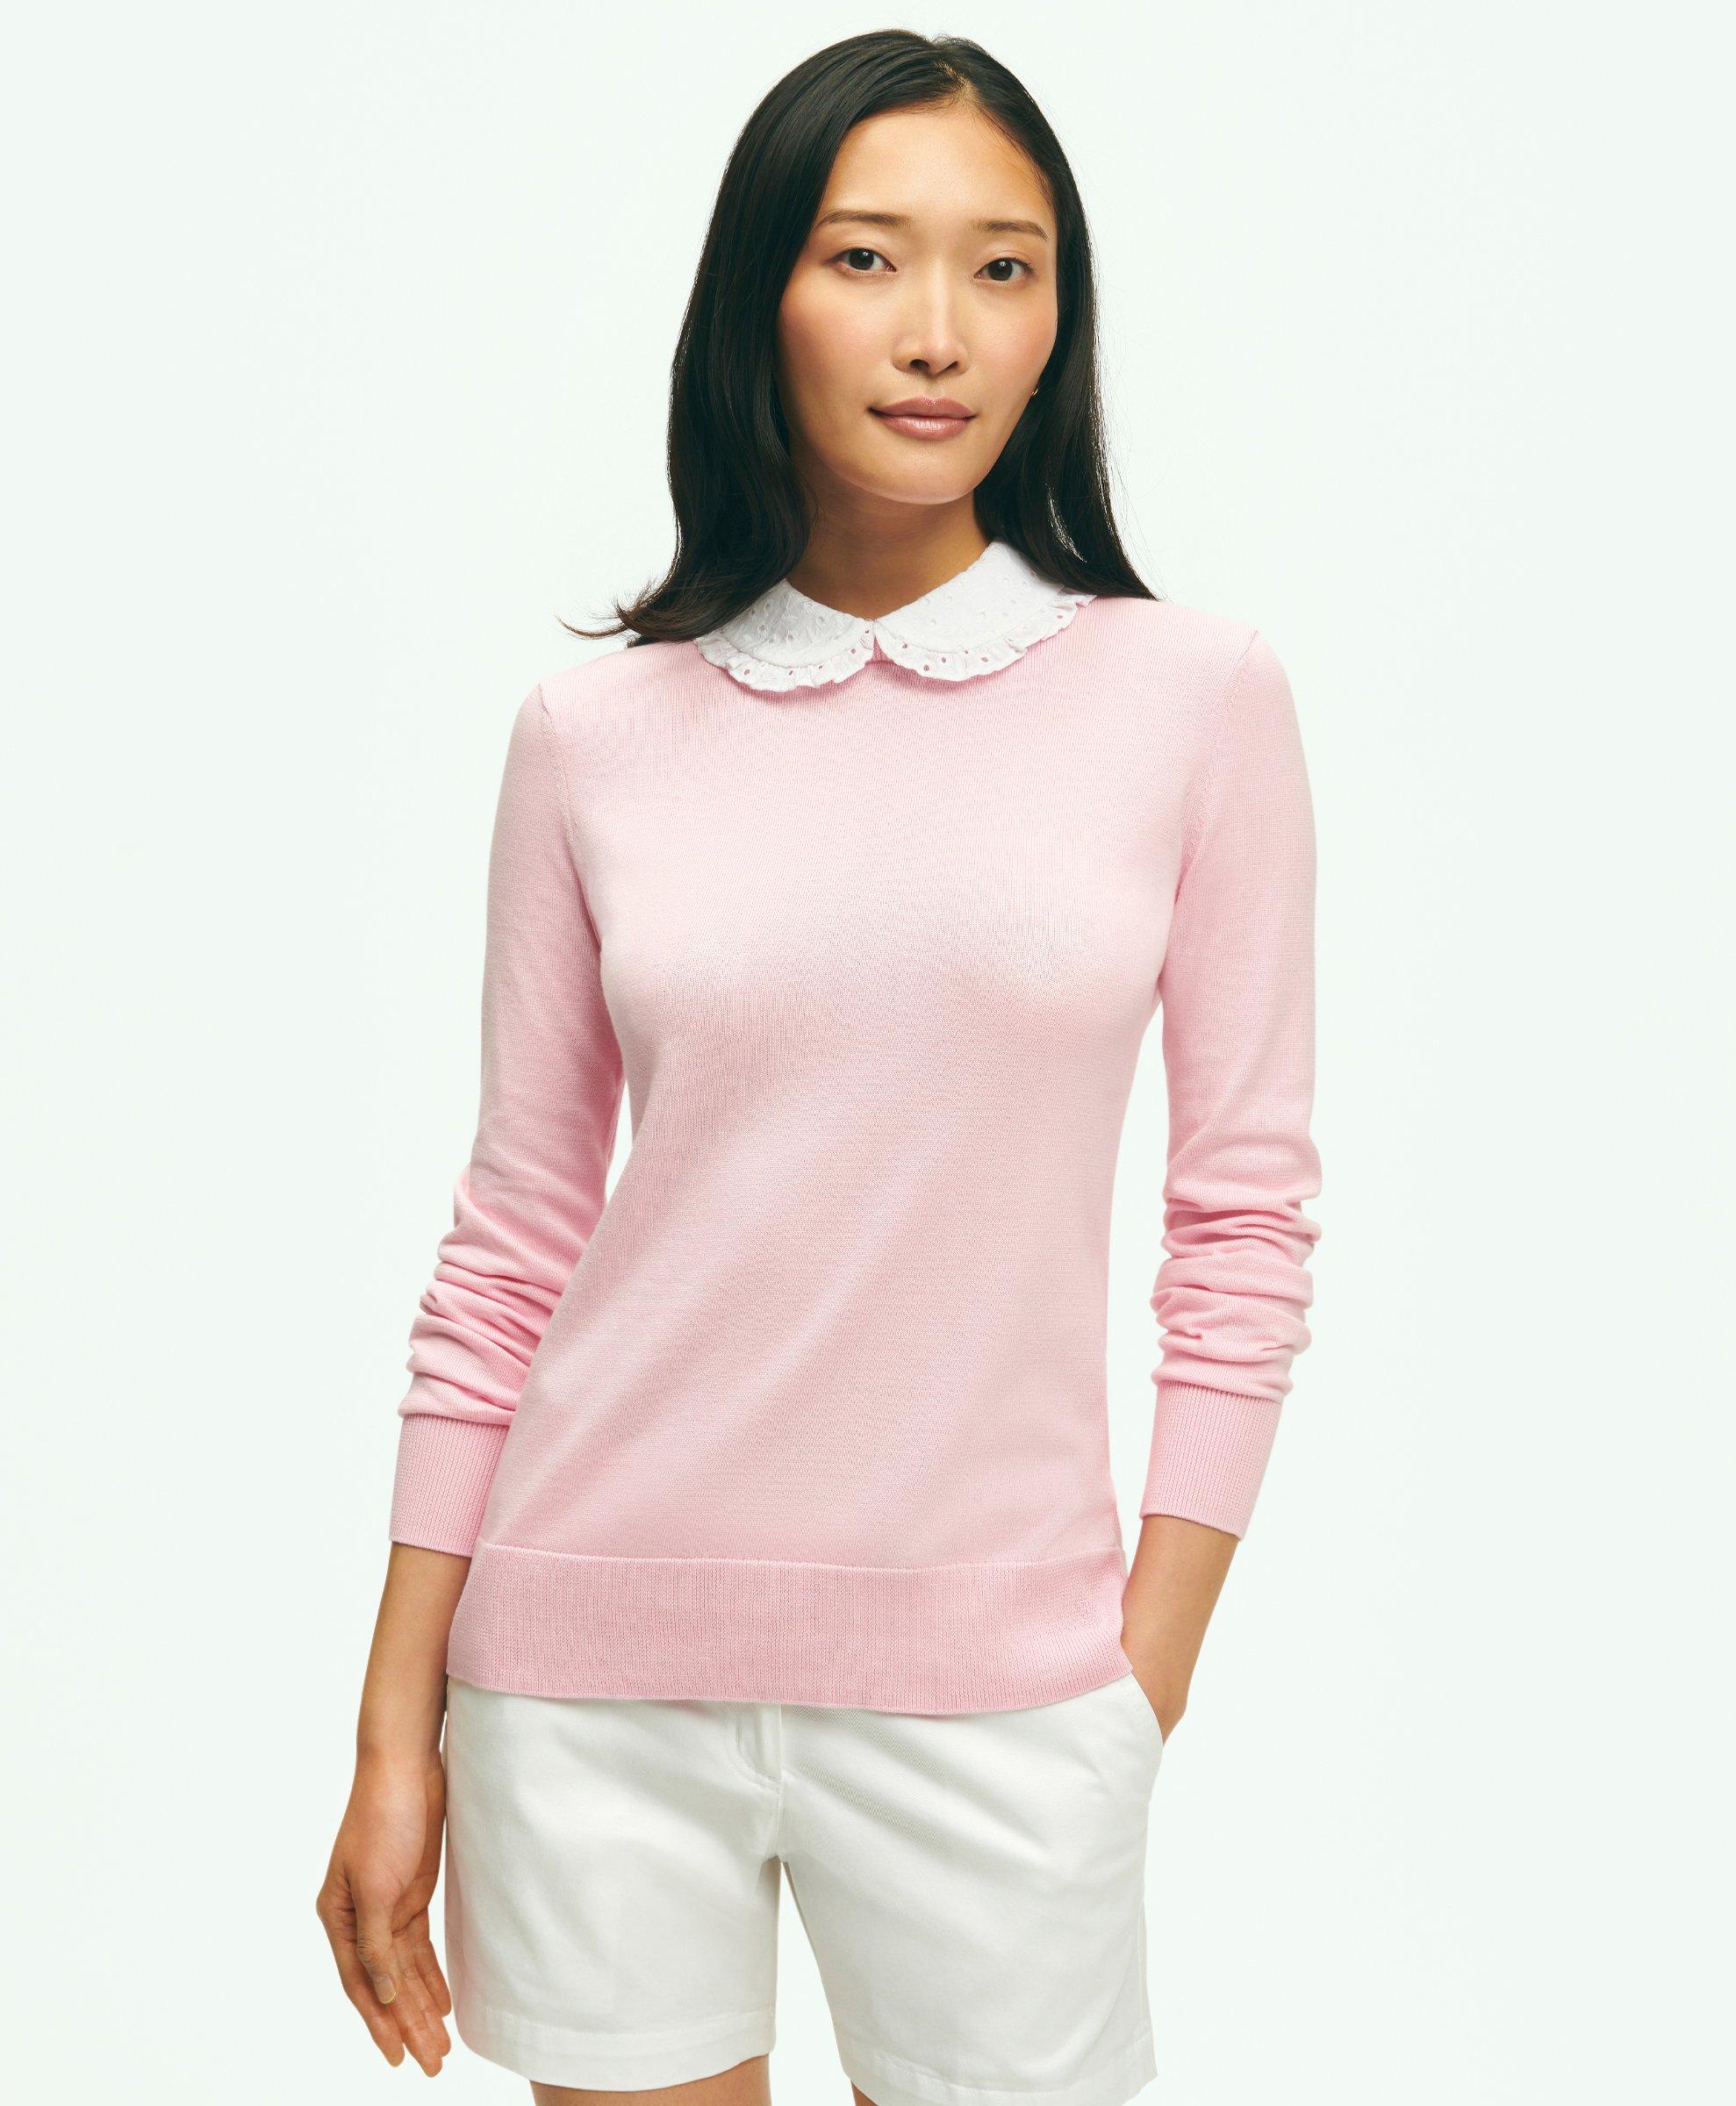 Brooks Brothers Cotton Sweater With Removable Ruffle Collar | Light Pink | Size Medium